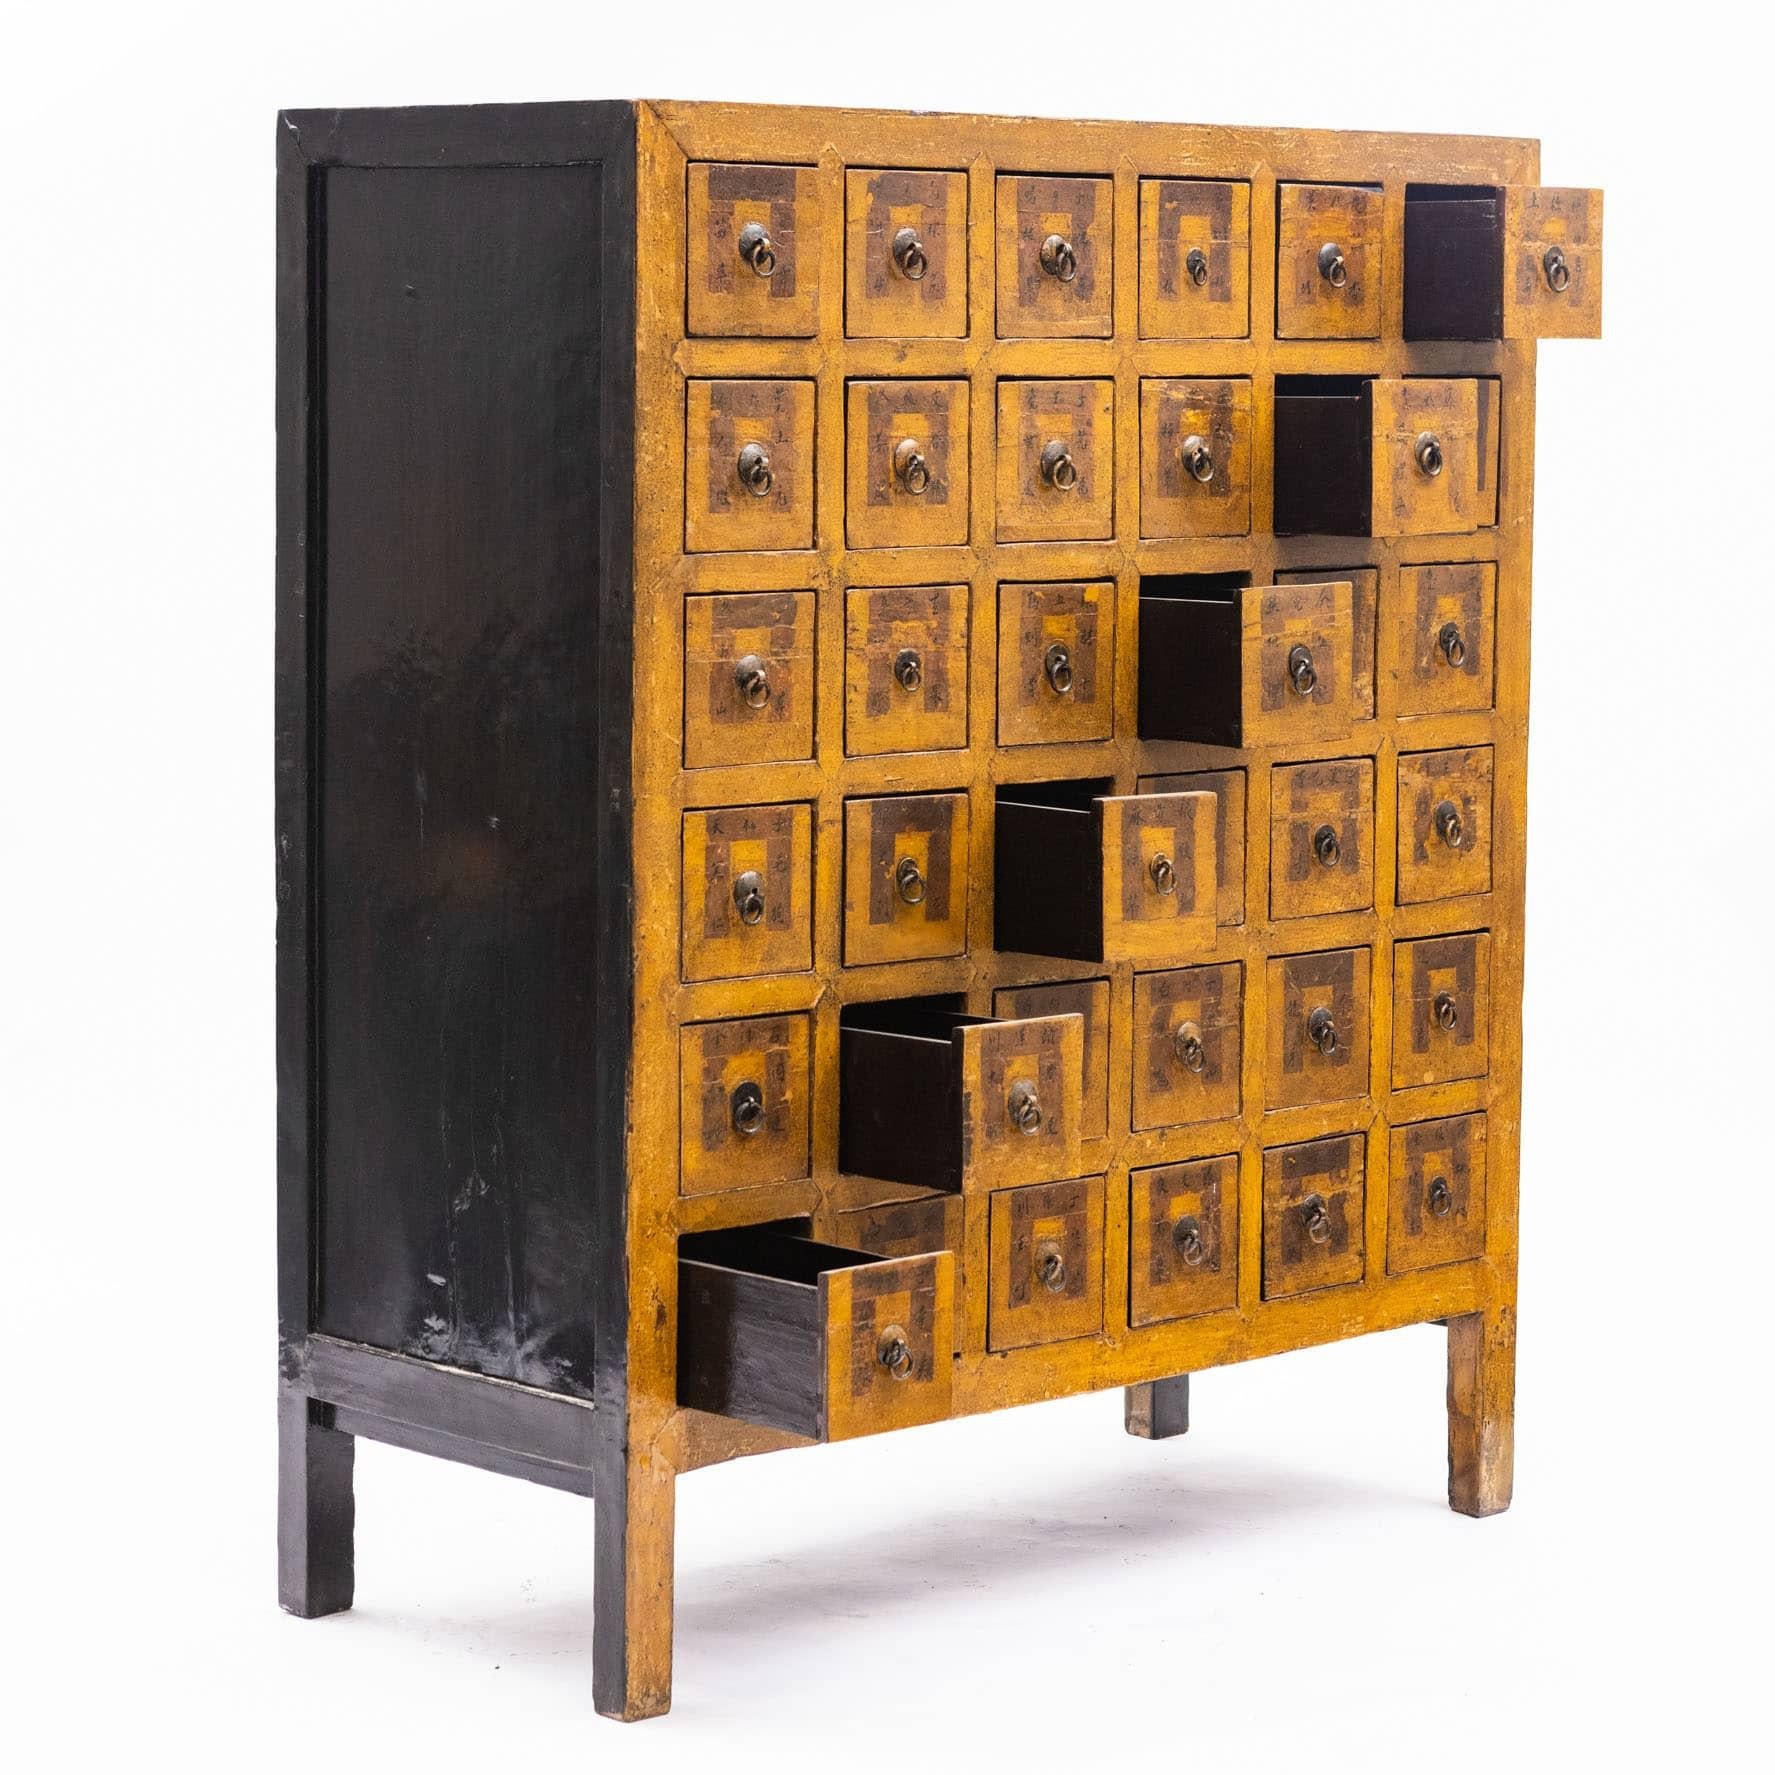 Apothecary (Pharmacy Medicine) Chest in original lacquer.
36 drawers (15 x 15) with description of contents, natural medicine, minerals, etc.
Linden wood in a curry color & black lacquer 
Shanxi Province approx. 1860.

Drawers Inside measure :
H 10